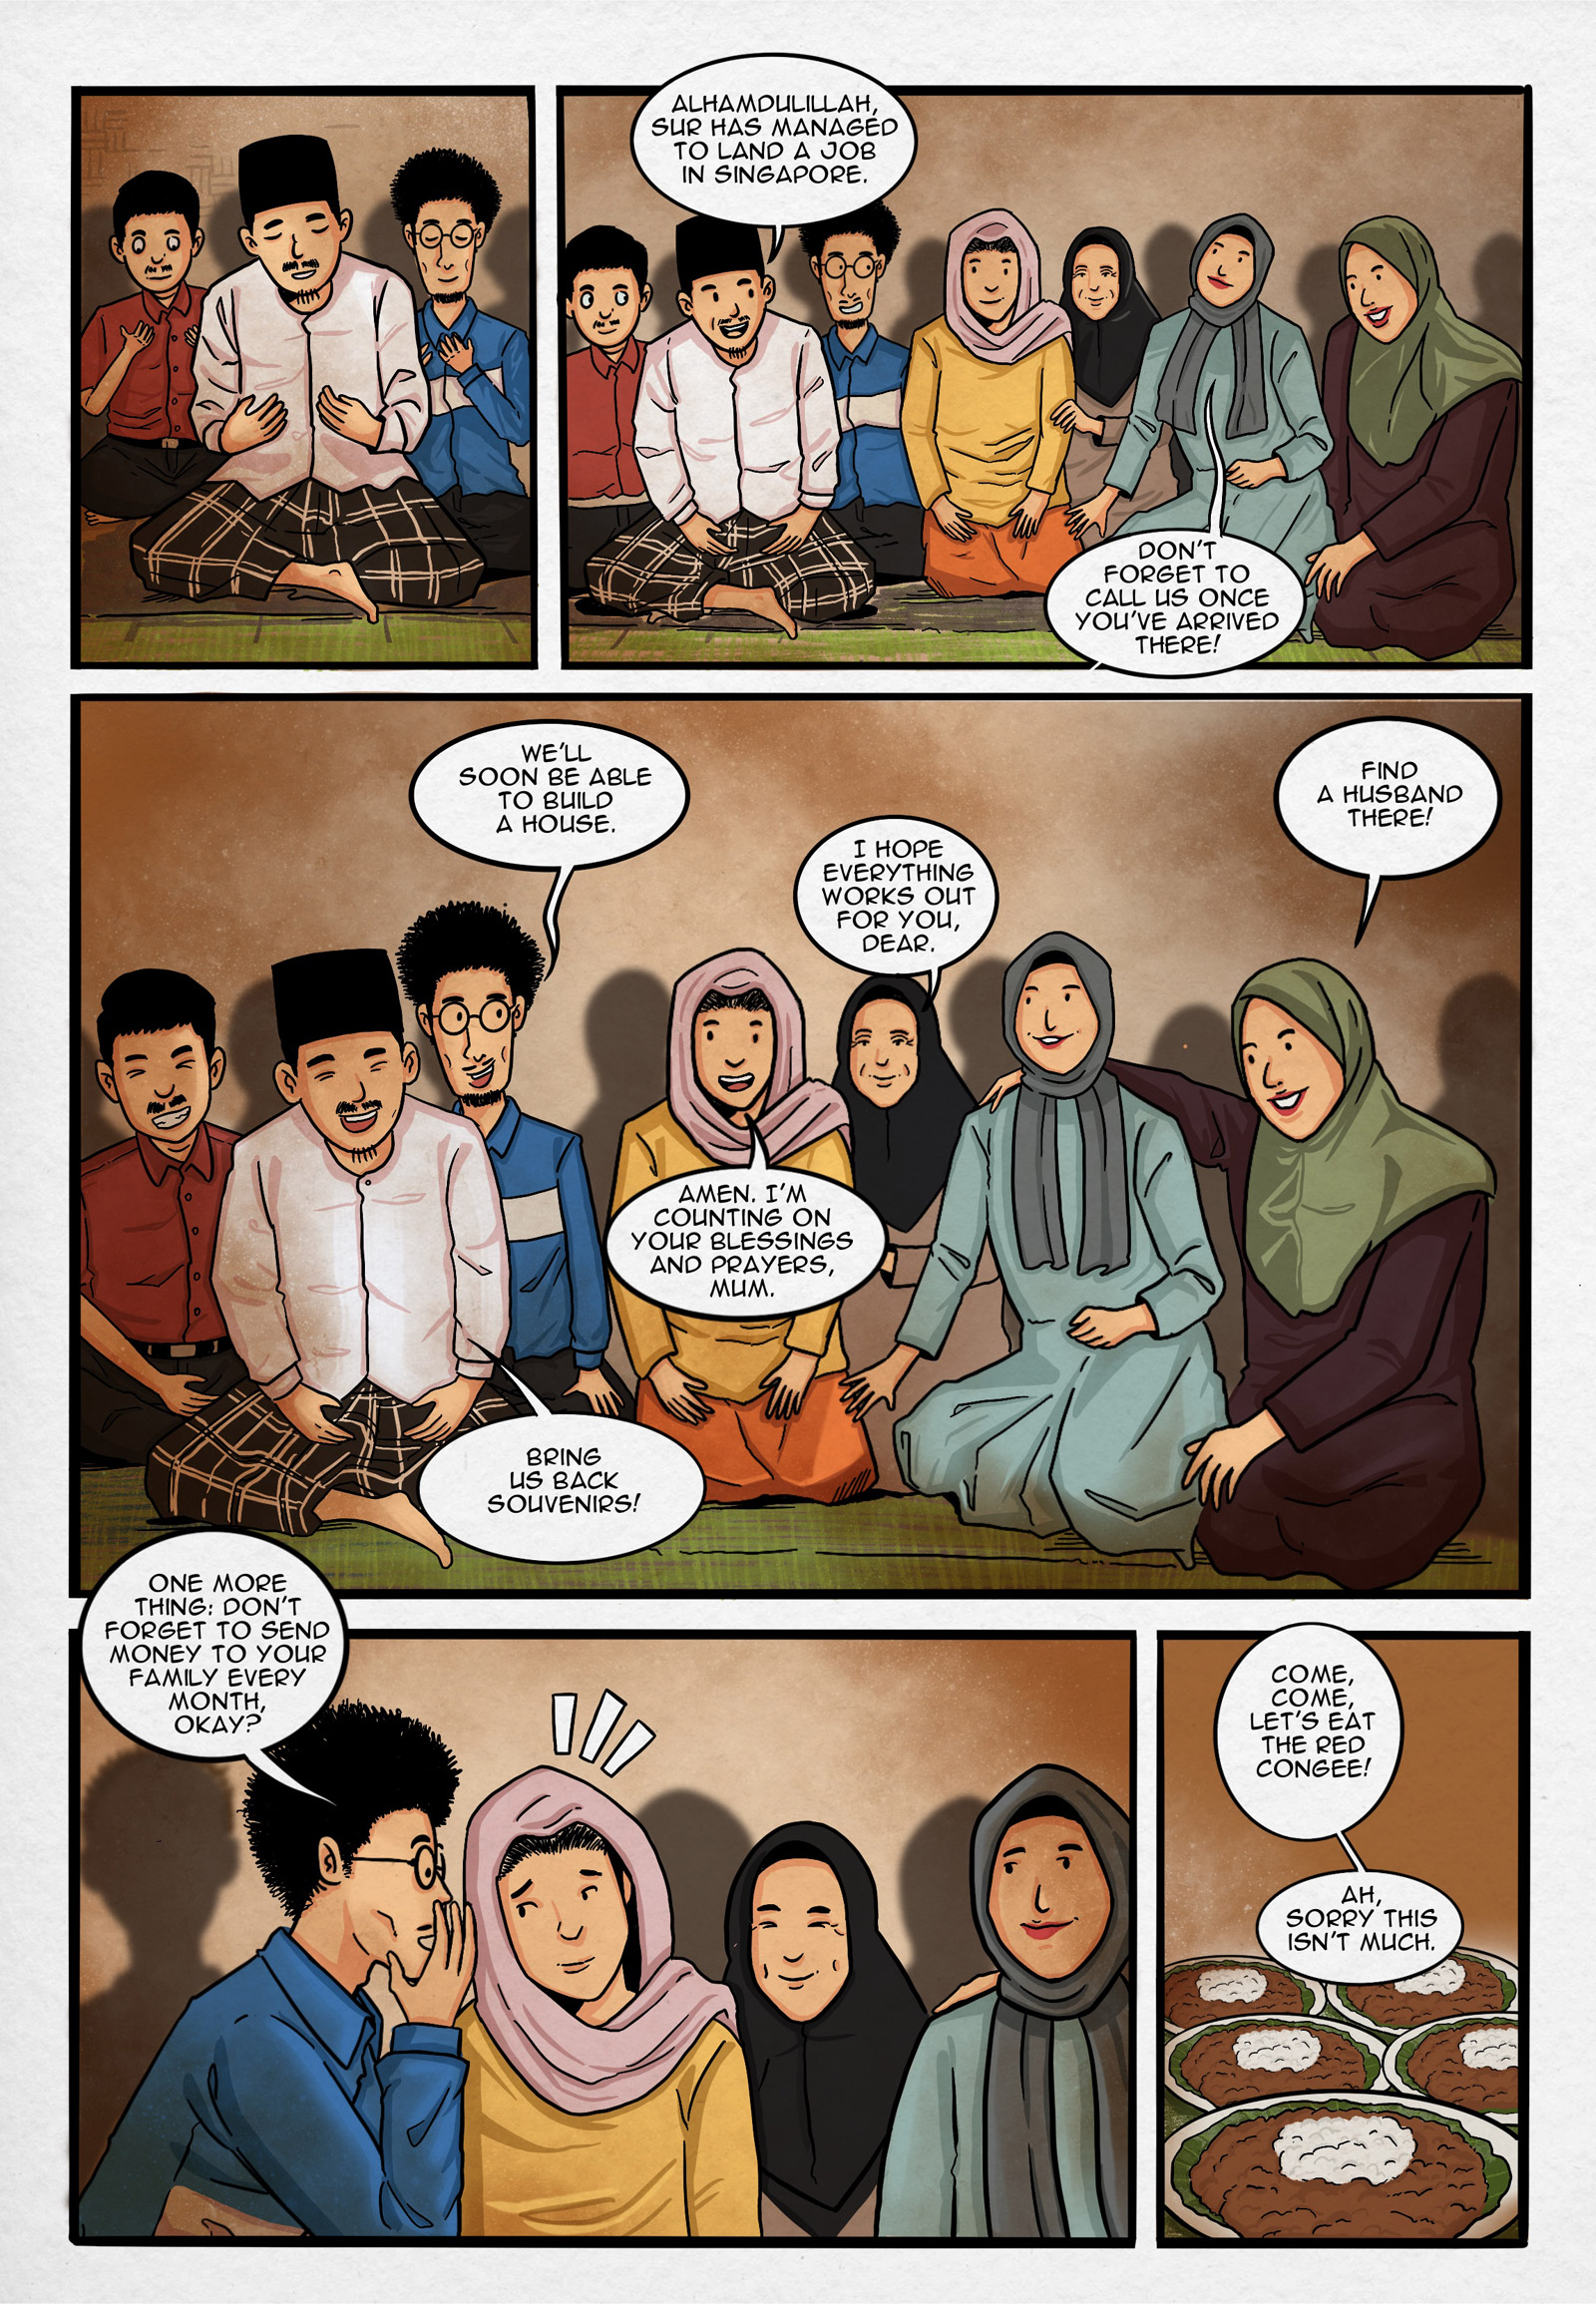 Page 1.
Panel 1. Ustad leads the prayer, followed by Suryati’s relatives and neighbours.

Panel 2. Ustad, the relatives, and the neighbours converse after praying.
Ustad: “Alhamdulillah, Sur has managed to land a job in Singapore.” Aunt: “Don’t forget to call us once you’ve arrived there!”

Panel 3. Hopes and dreams for Suryati. Uncle: “We’ll soon be able to build a house.” Mother: “I hope everything works out for you, dear.” Uncle: “Find a husband there!” Suryati: “Amen. I’m counting on your blessings and prayers, mum.” Ustad: “Bring us back souvenirs!”

Panel 4. Uncle: “One more thing: don’t forget to send money to your family every month, okay?”

Panel 5. Red and white congee is often served in ceremonial feasts. Mother: “Come, come, let’s eat the red congee!”
